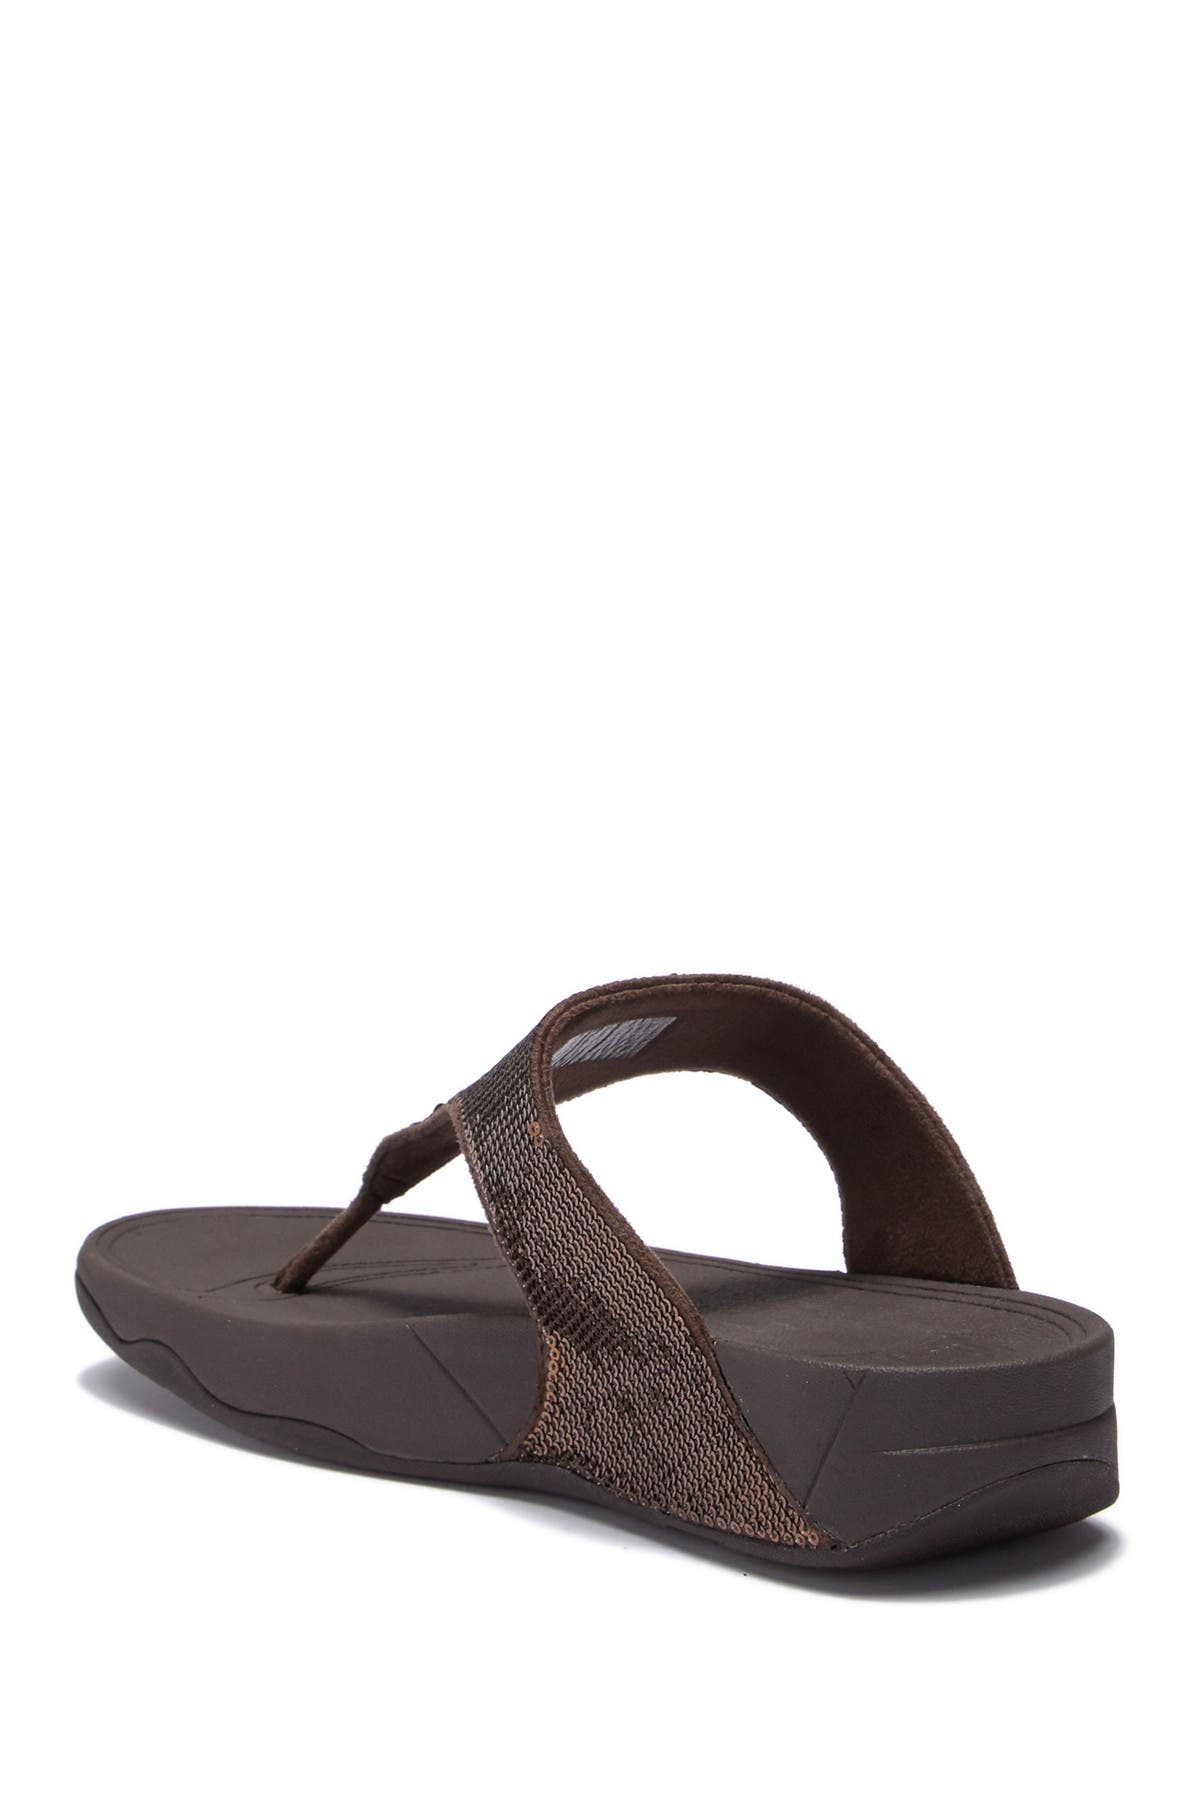 fitflop electra classic